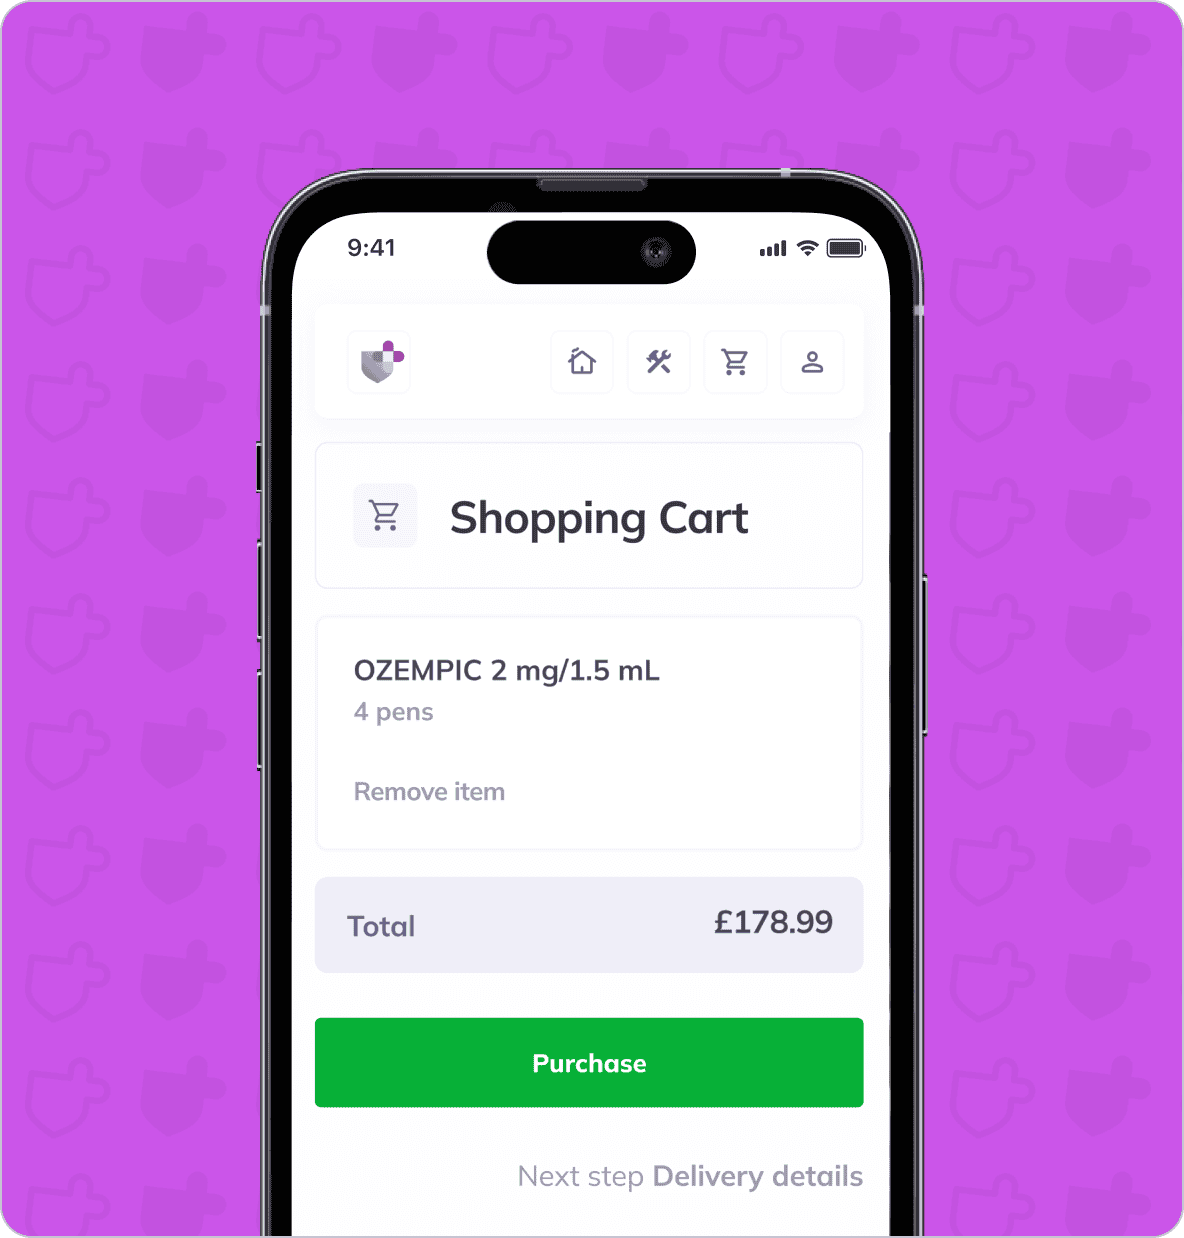 A smartphone screen displaying a shopping cart for "OZEMPIC 2 mg/1.5 mL" with a quantity of 4 pens and a total cost of £178.99. There is a "Purchase" button and an option to remove the item.